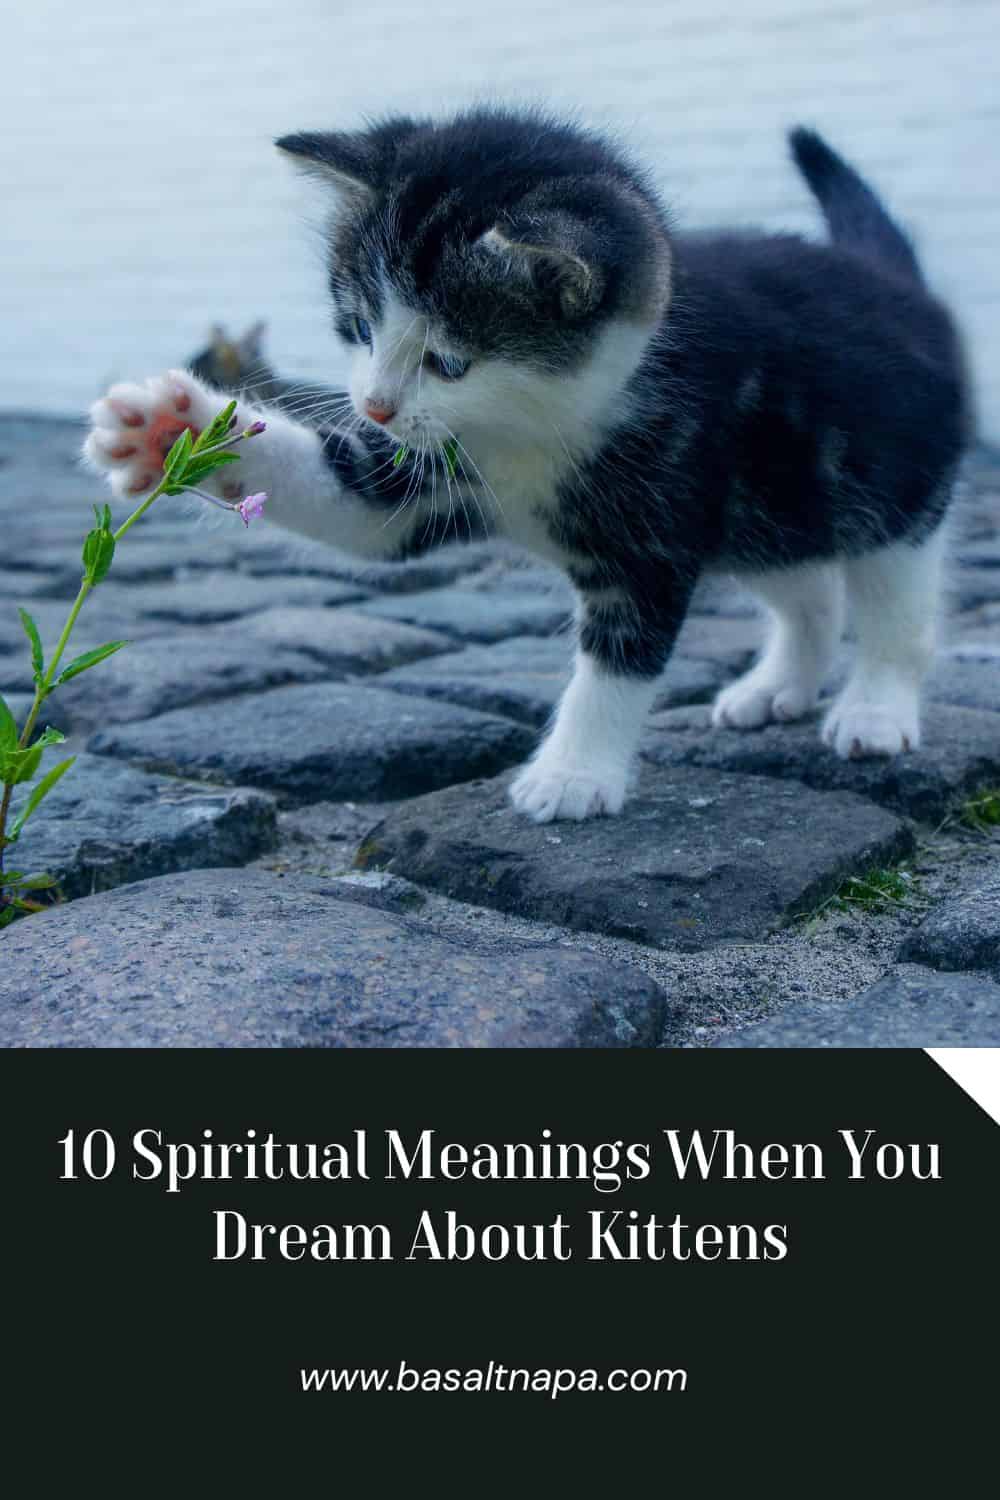 10 Spiritual Meanings When You Dream About Kittens